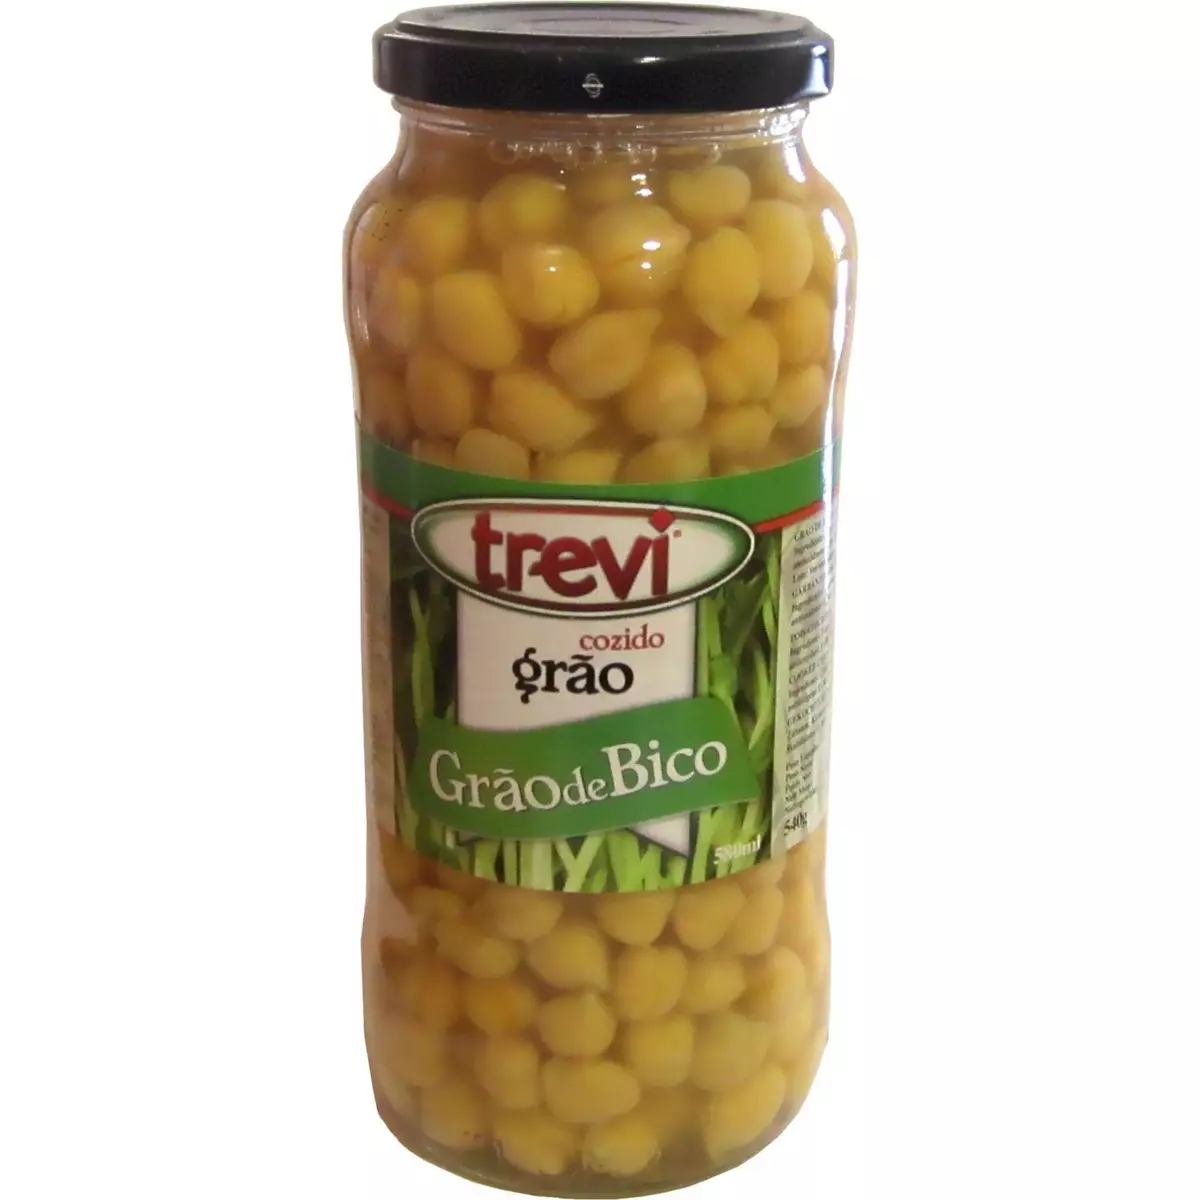 TREVI Pois chiches cuits bocal 540g